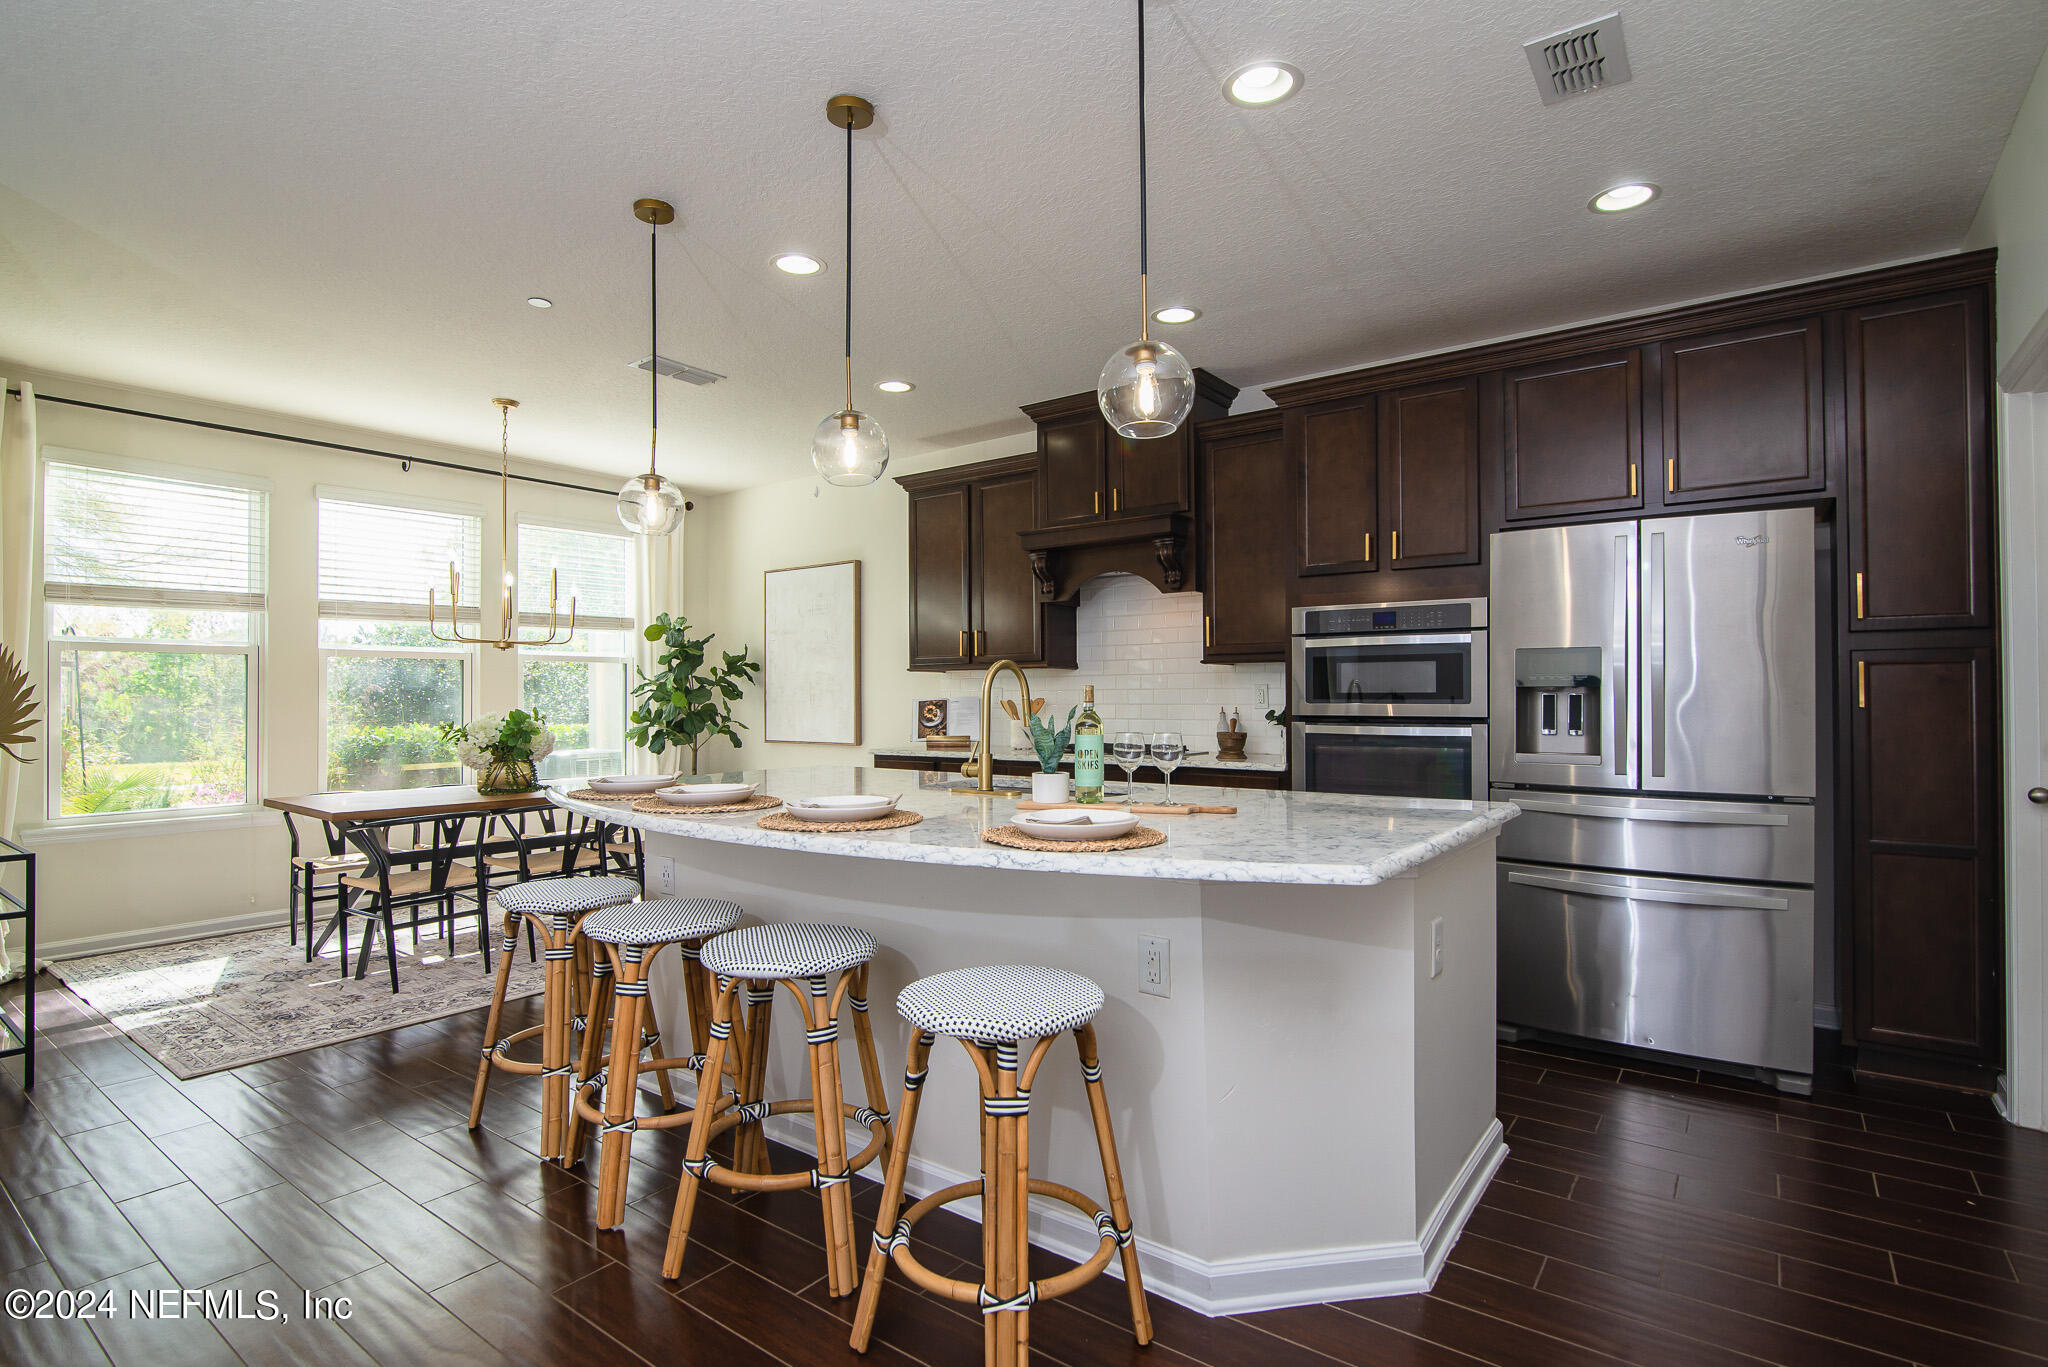 a kitchen with stainless steel appliances a dining table chairs stove refrigerator and wooden floor